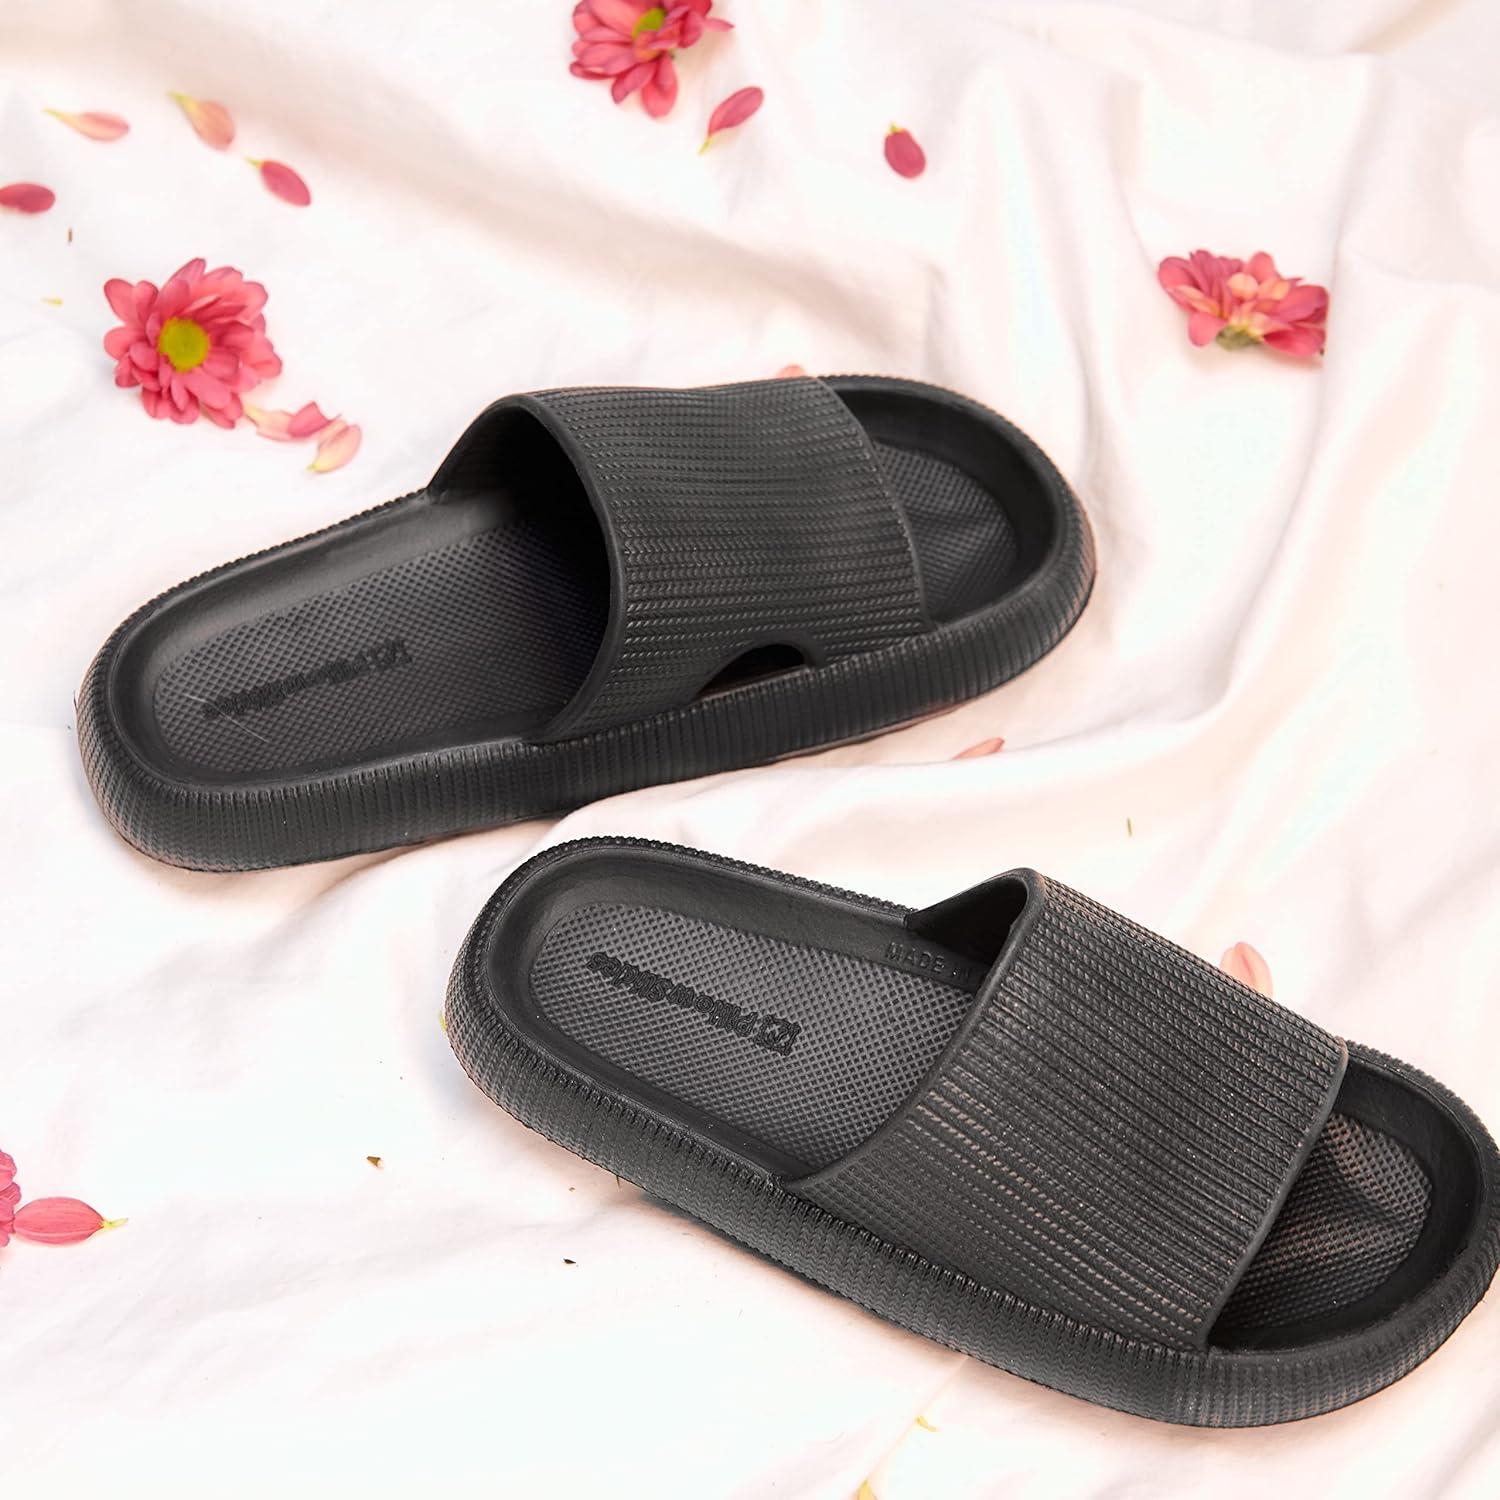  Pillow Slides | Woman's and Men's Slippers | Non-Slip | Thick  Soles | Ergonomically Designed Slides | Indoor & Outdoor Use | Soft Shower